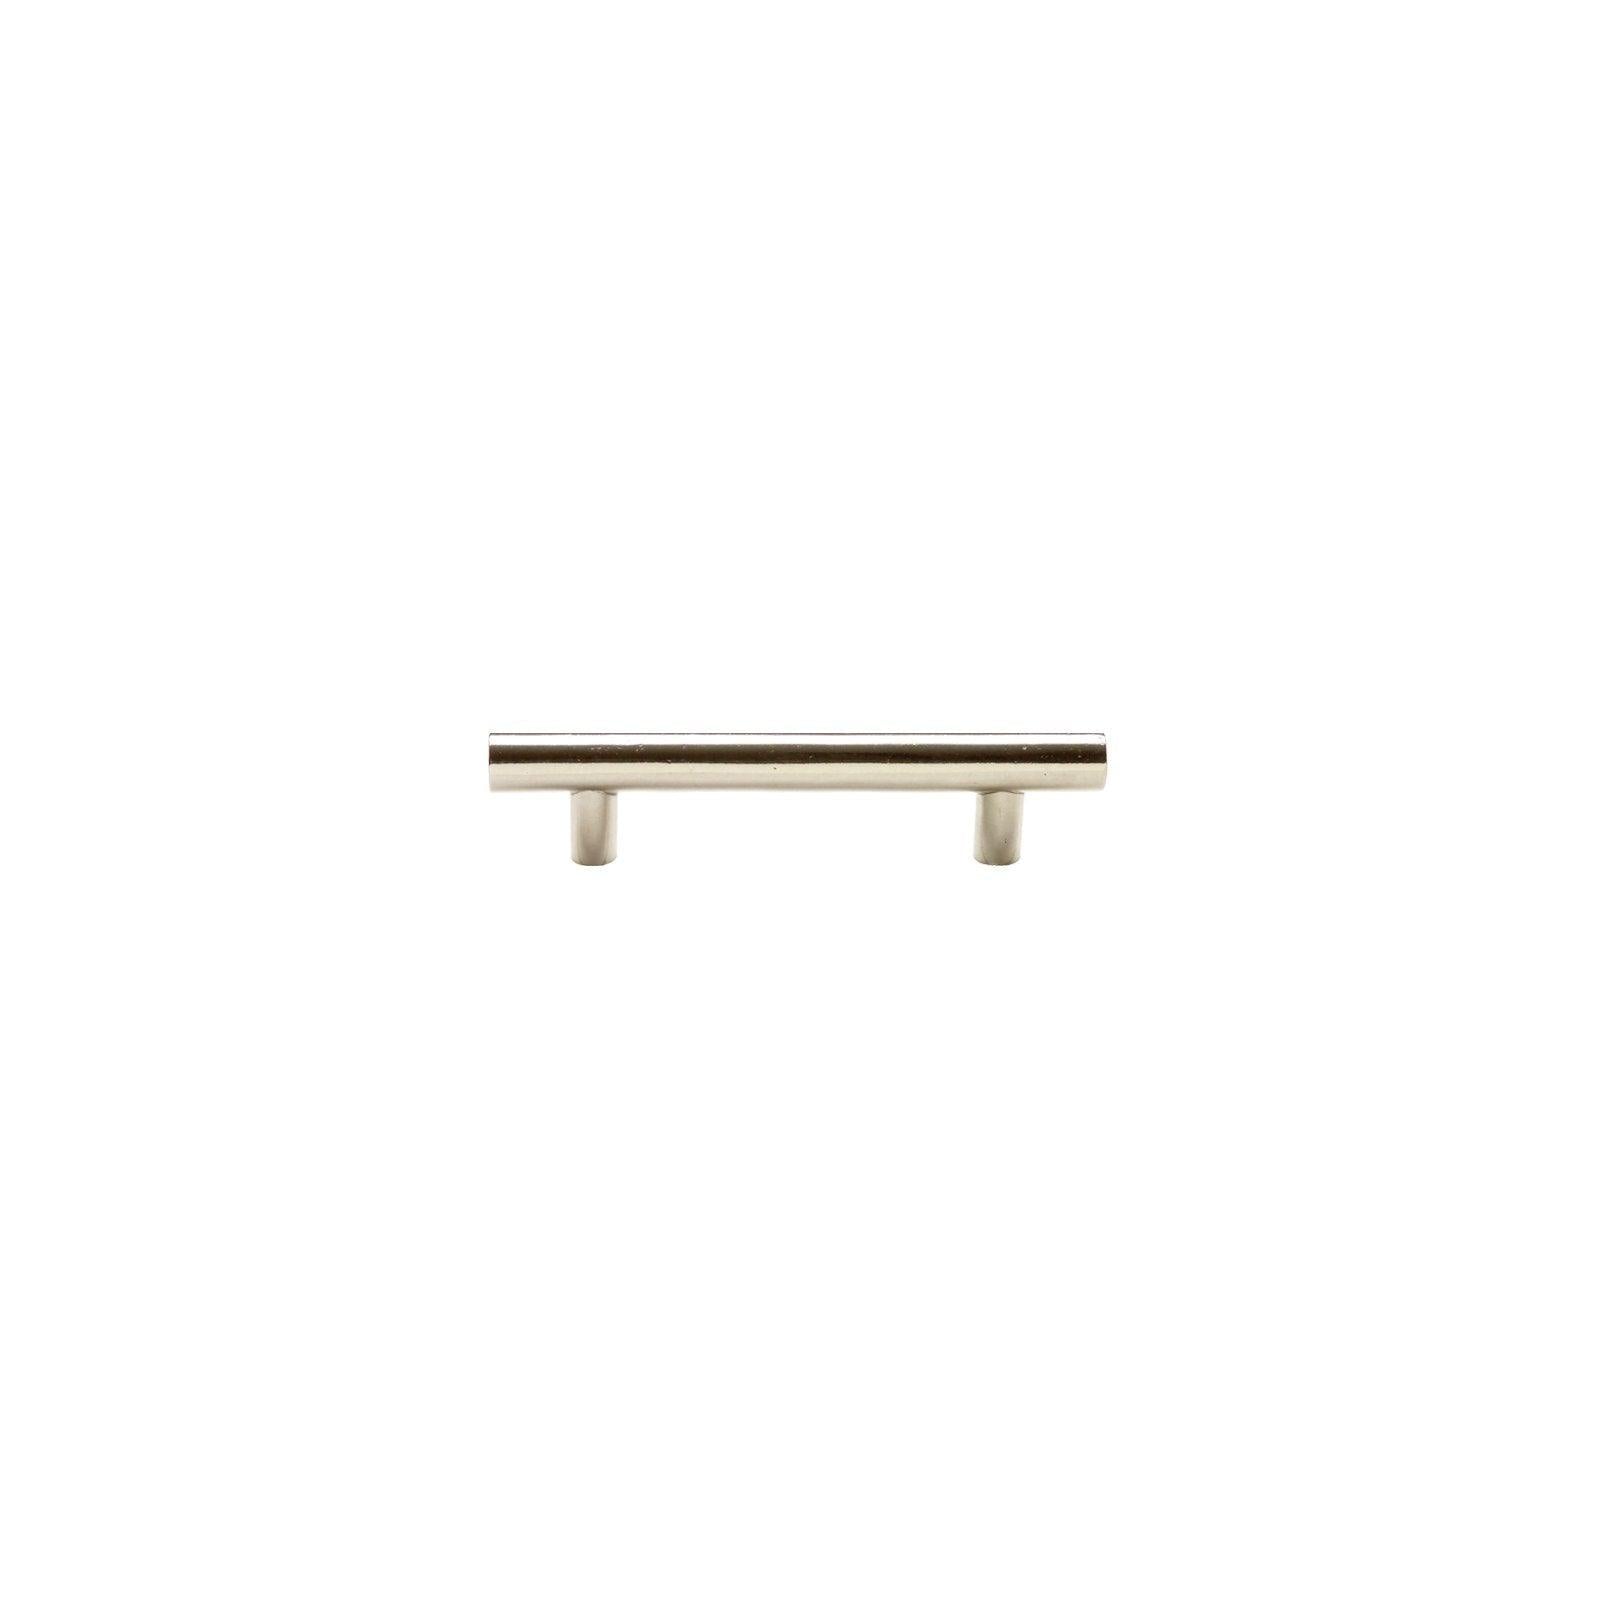 CK480 - 4" C-to-C Tube Cabinet Pull - {{ show.name }}